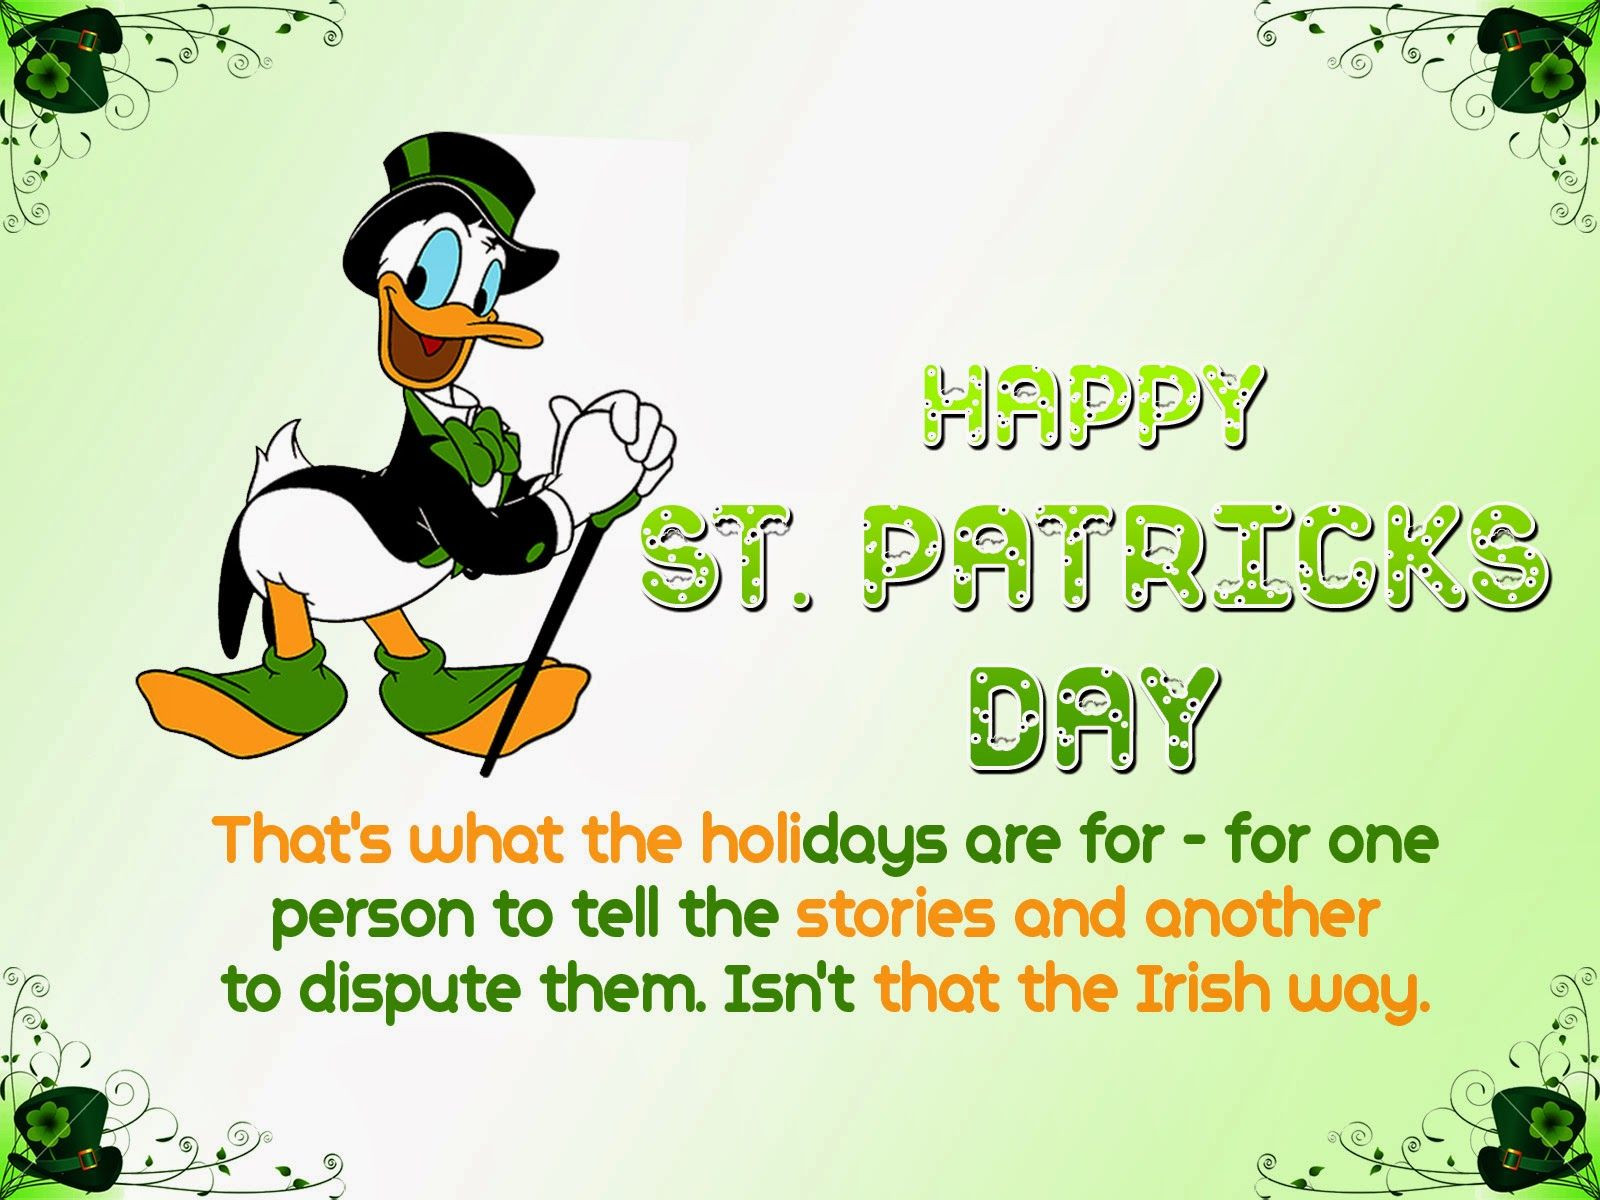 St Patrick's Day Greetings Quotes
 Happy St Patricks Day s and for